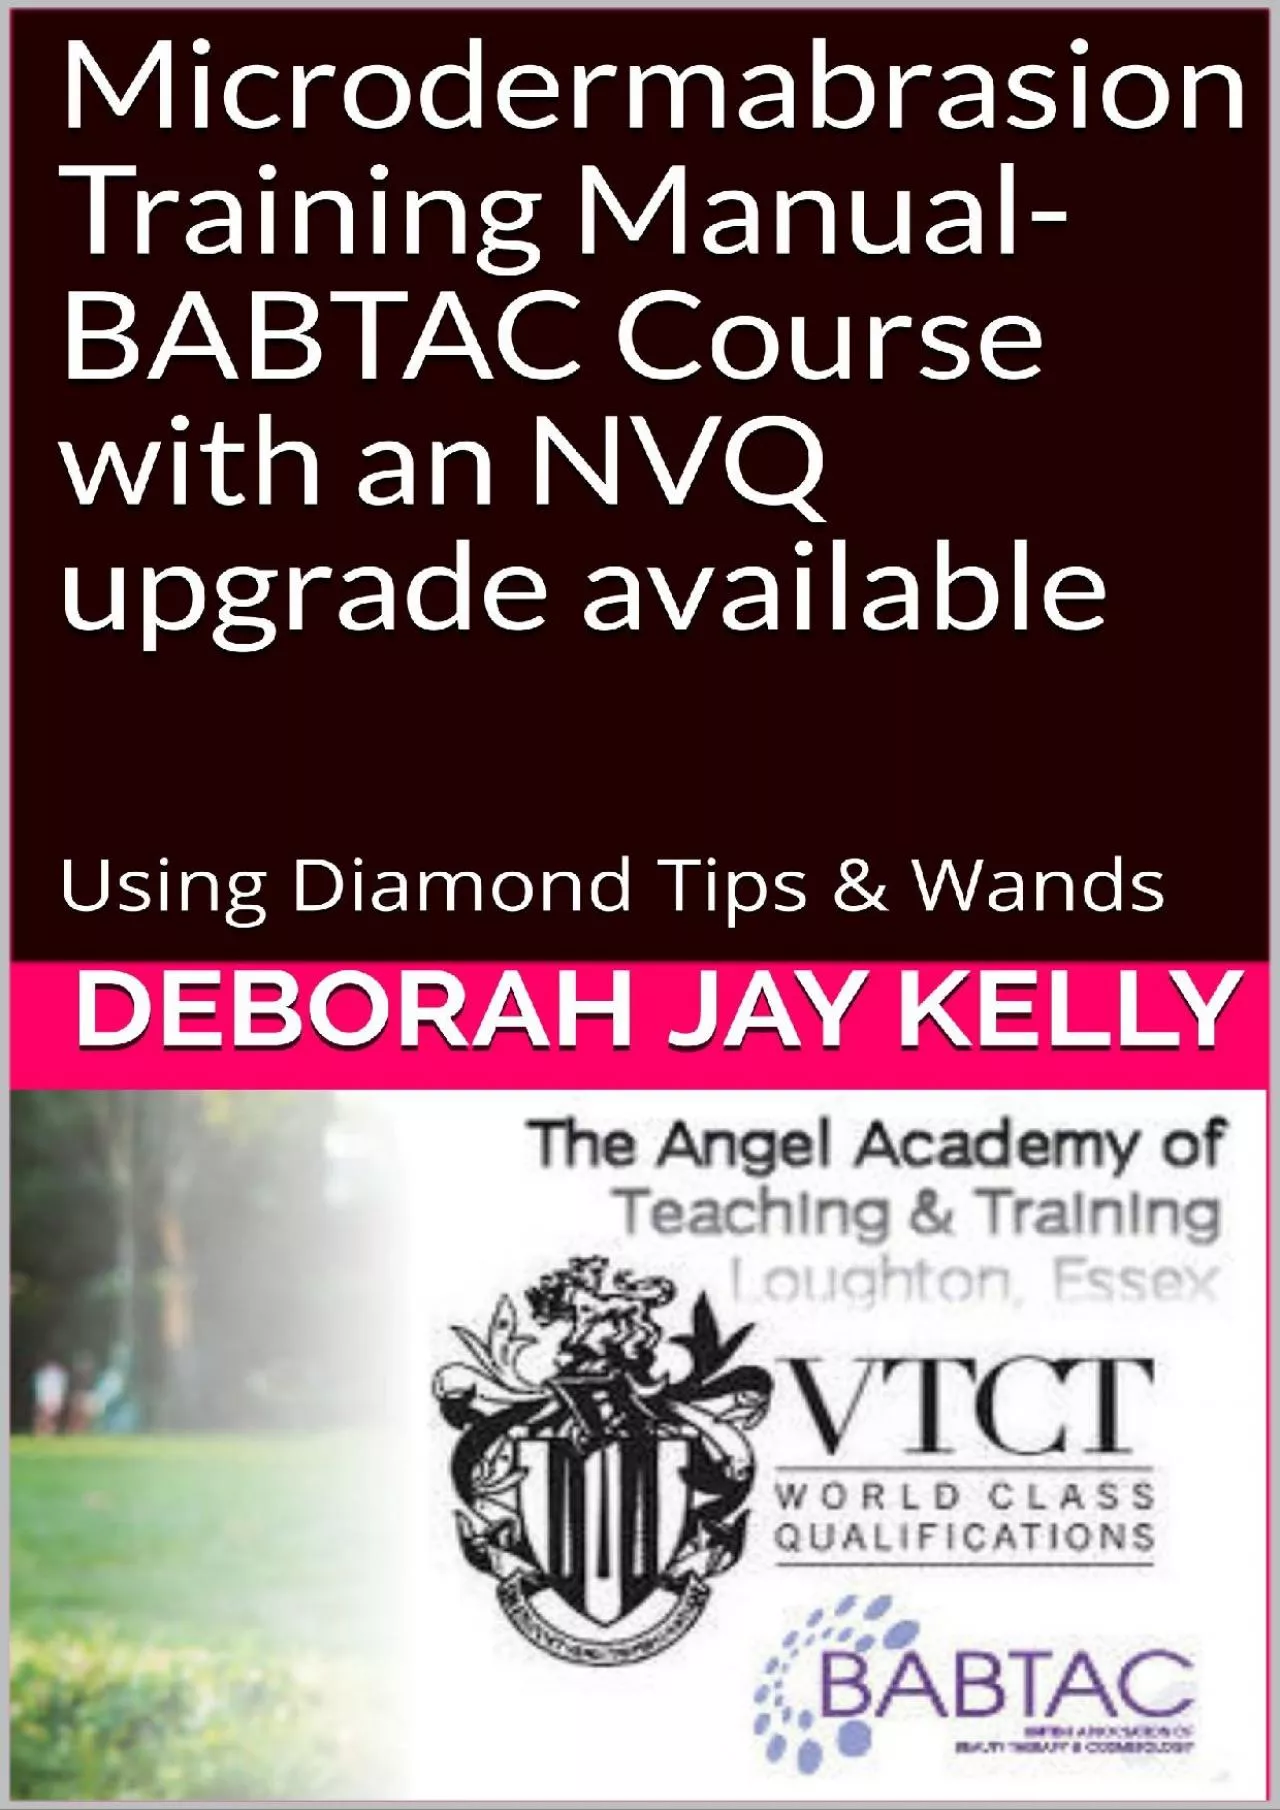 [EBOOK] Microdermabrasion Training Manual- BABTAC Course with an NVQ upgrade available: